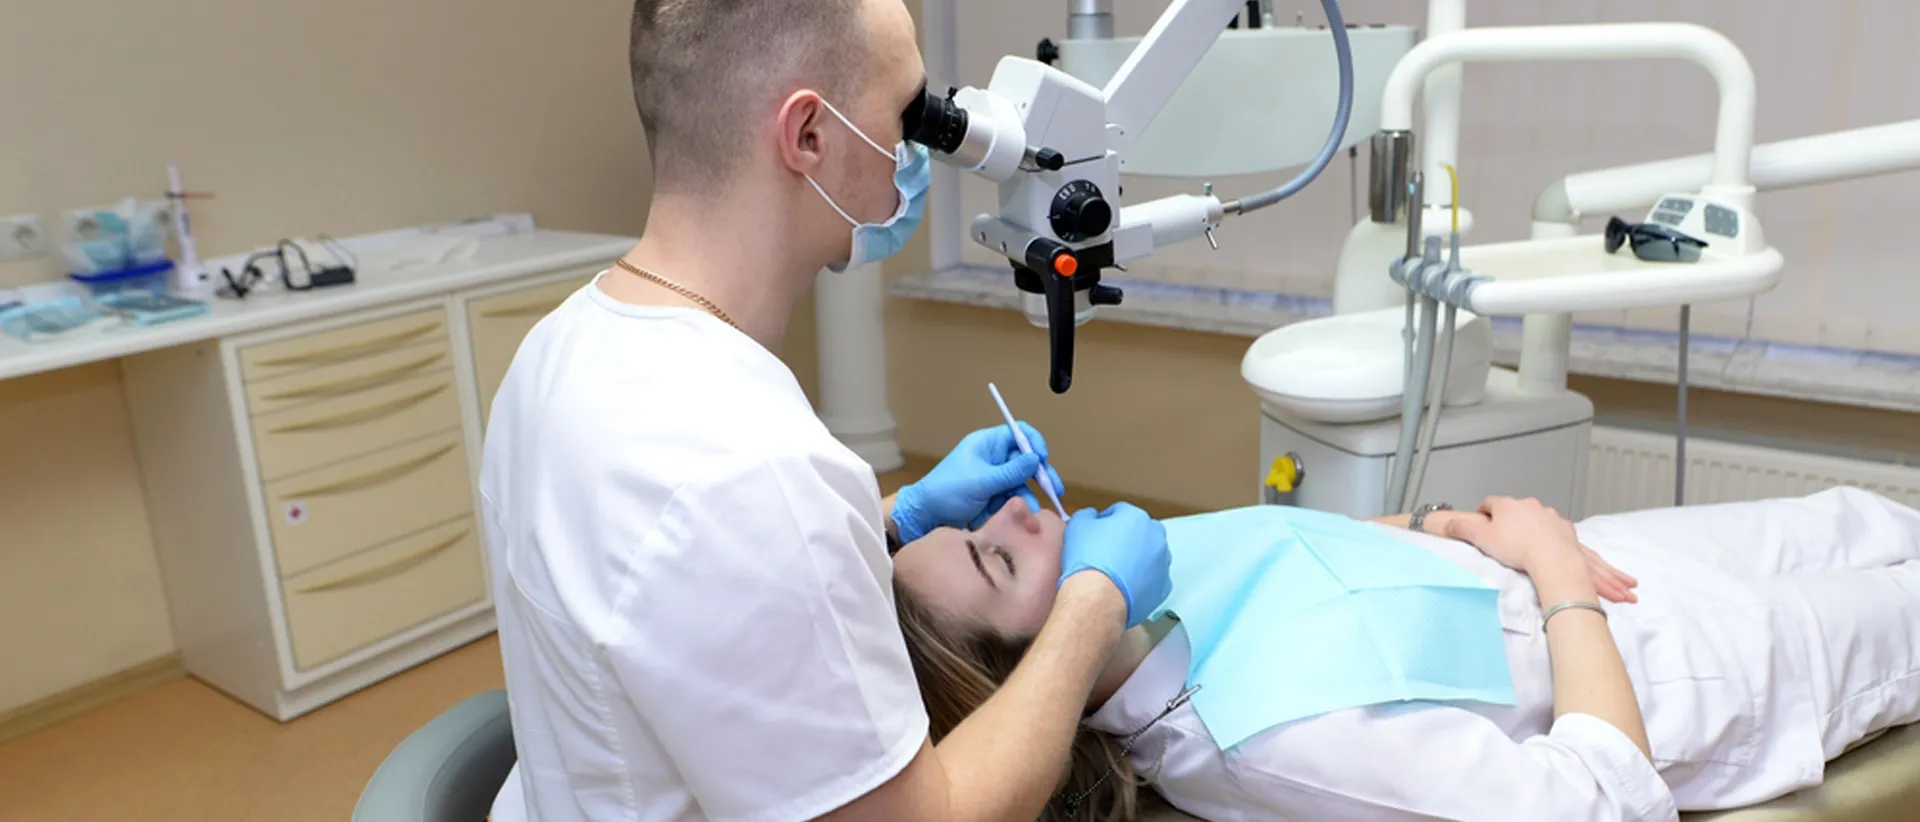 Dentist treating patient at a dental implant clinic
